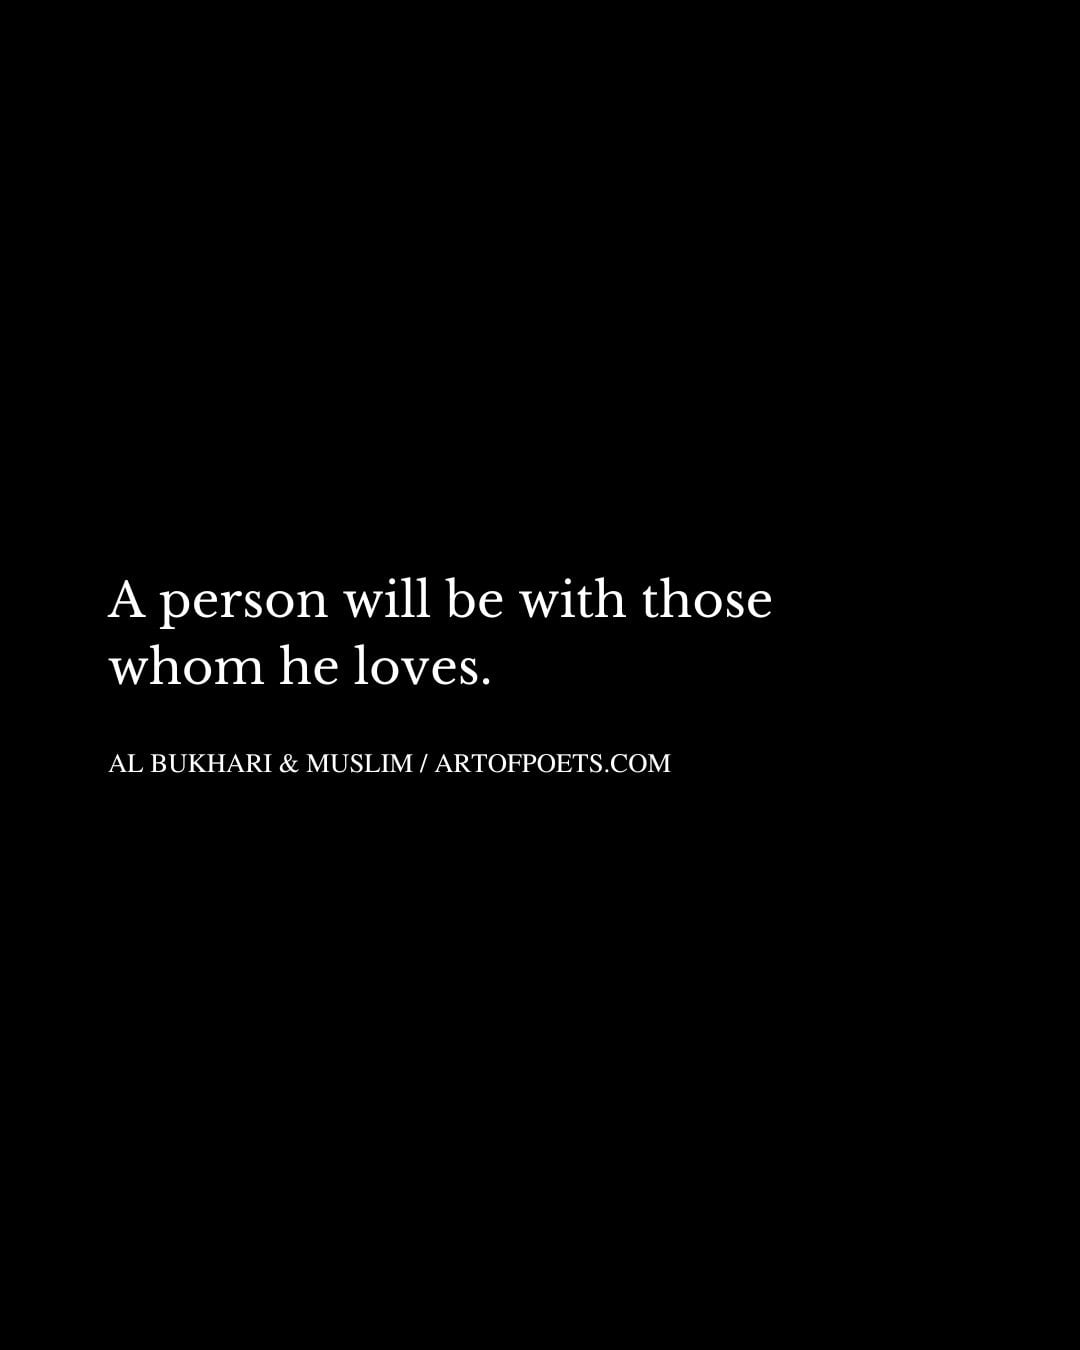 A person will be with those whom he loves